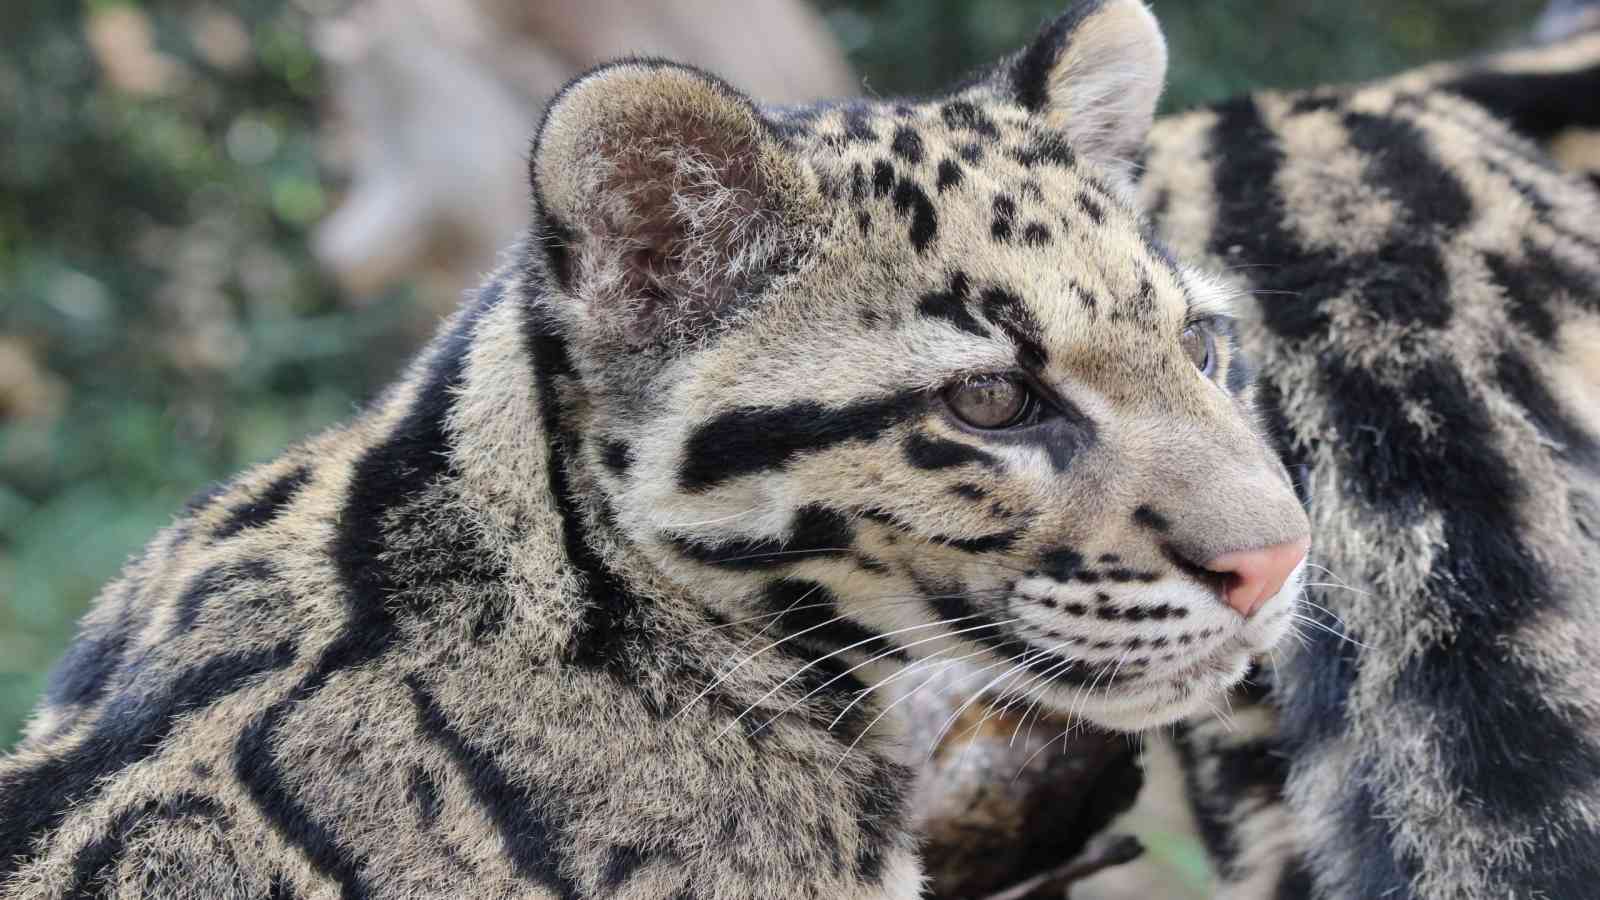 International Clouded Leopard Day 2022: Date, History, Importance